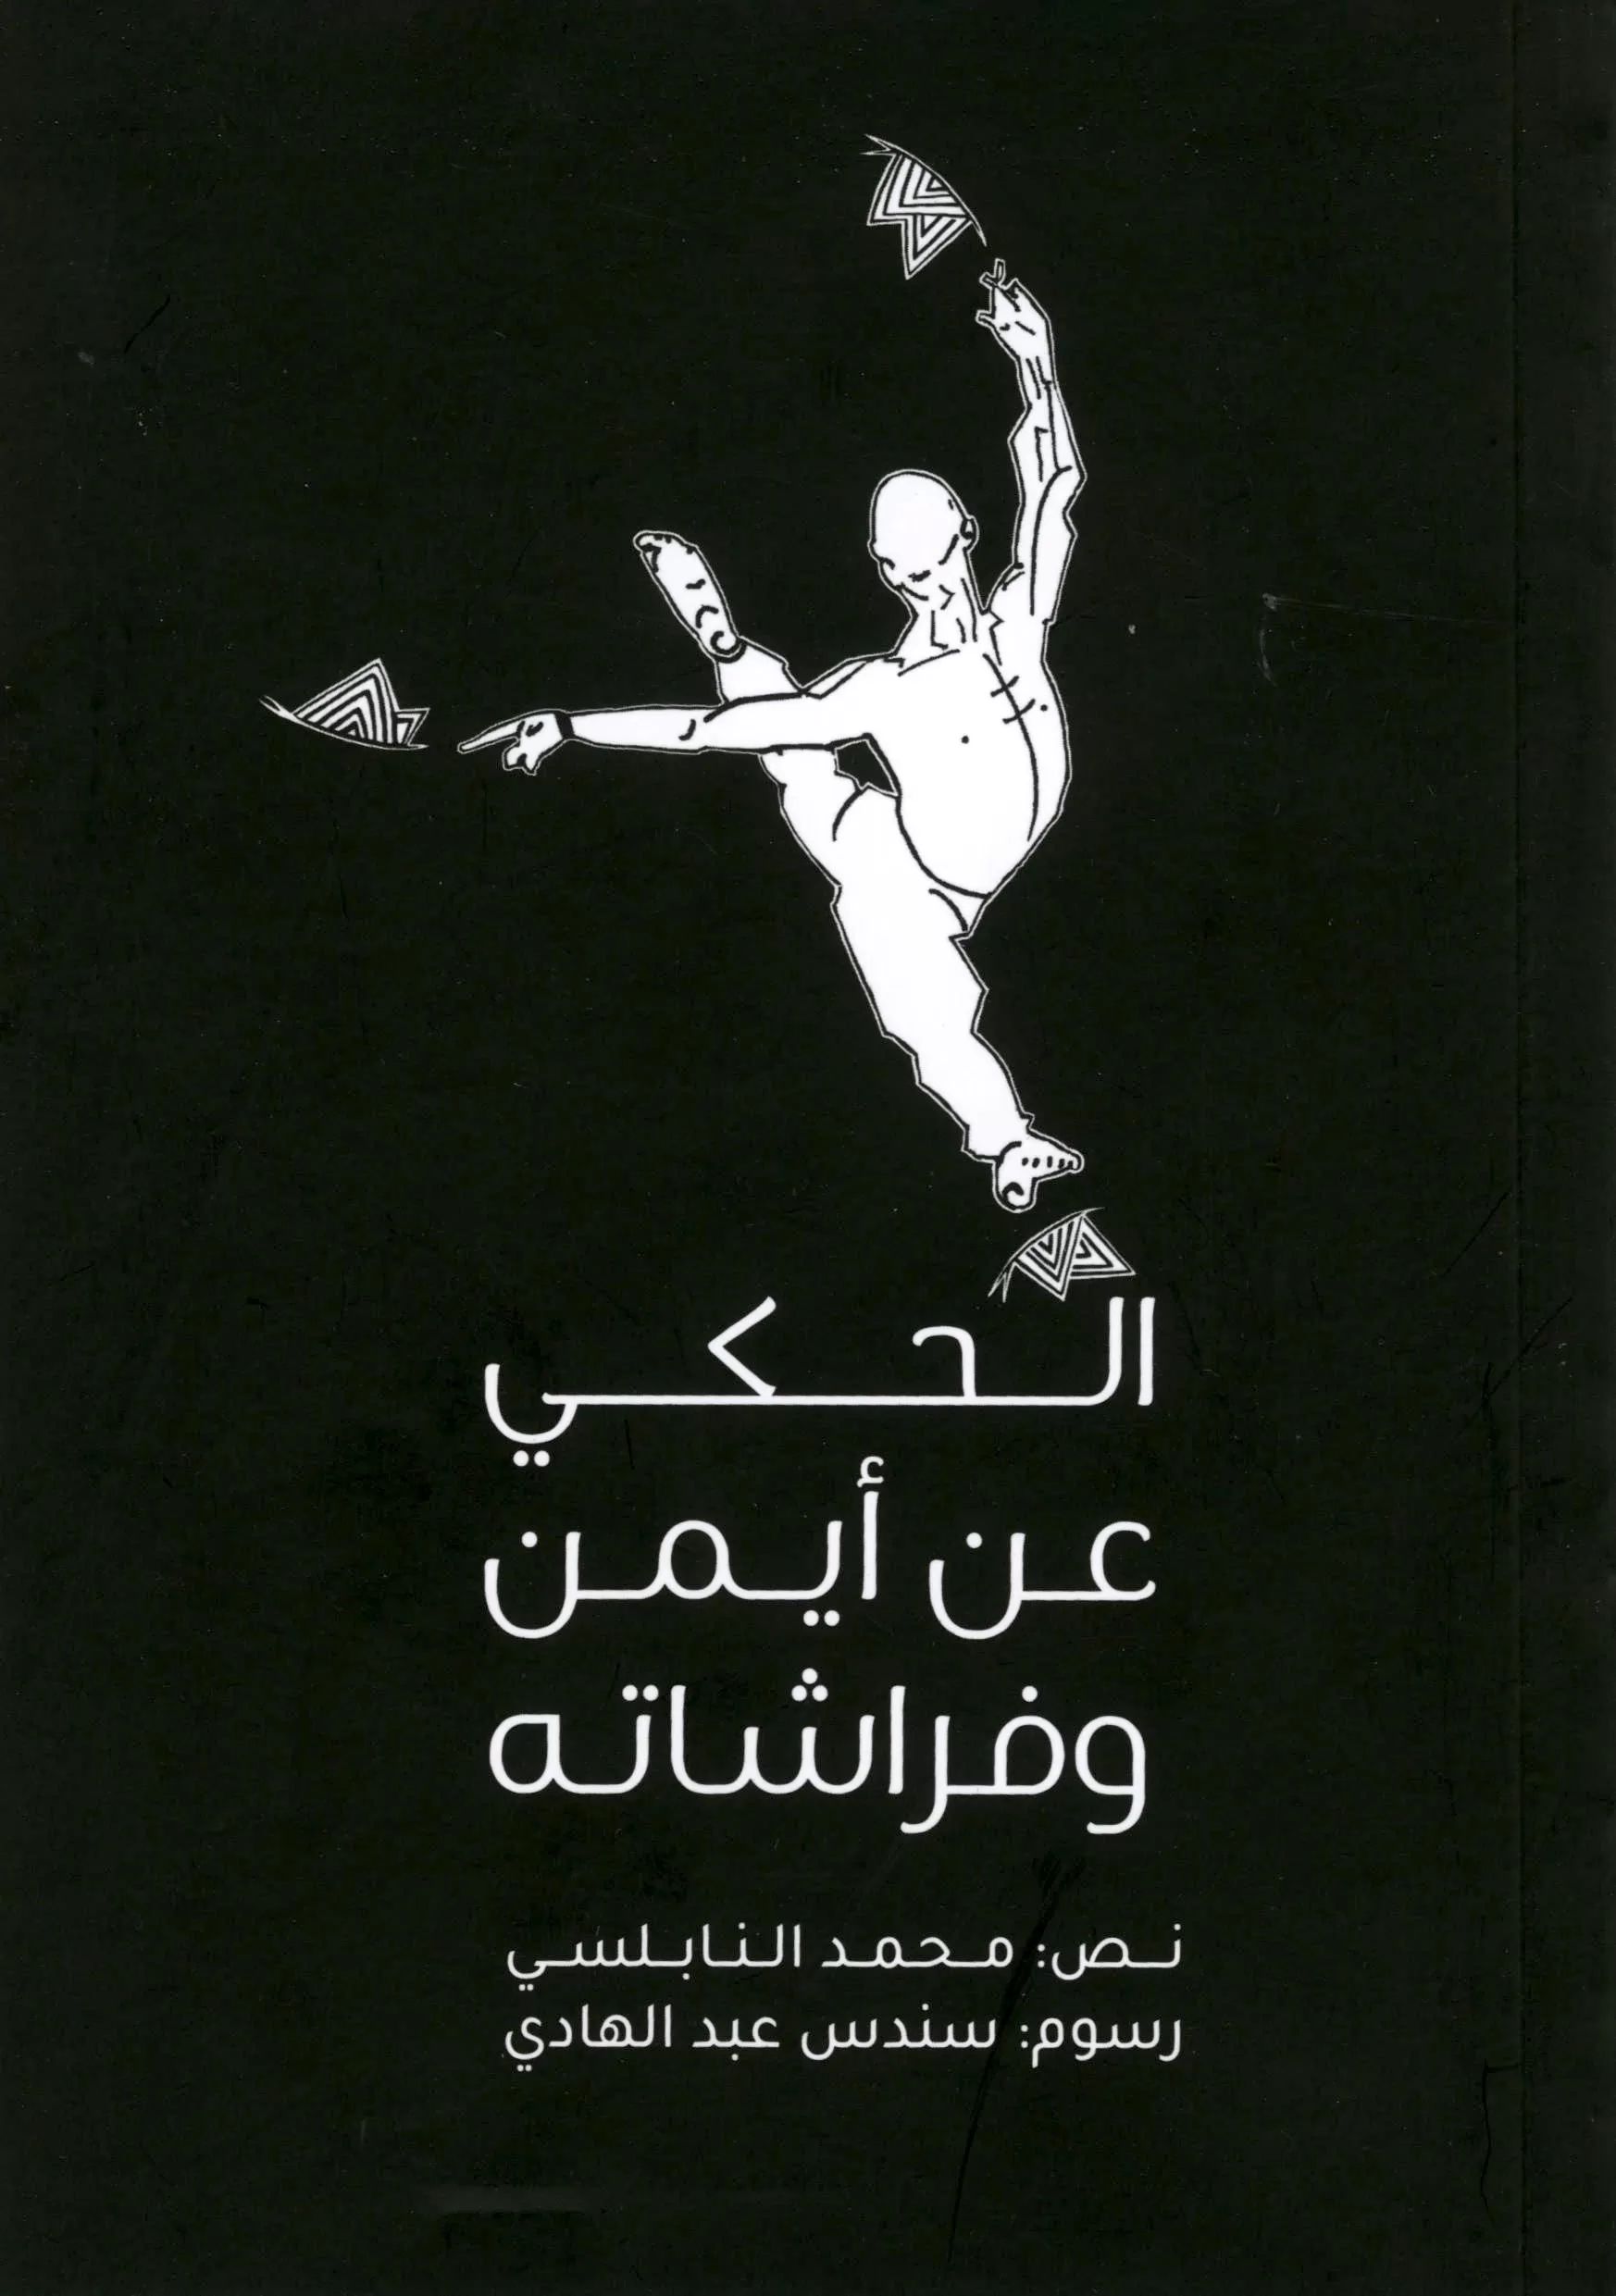 Book cover "On Ayman and His Butterflies"